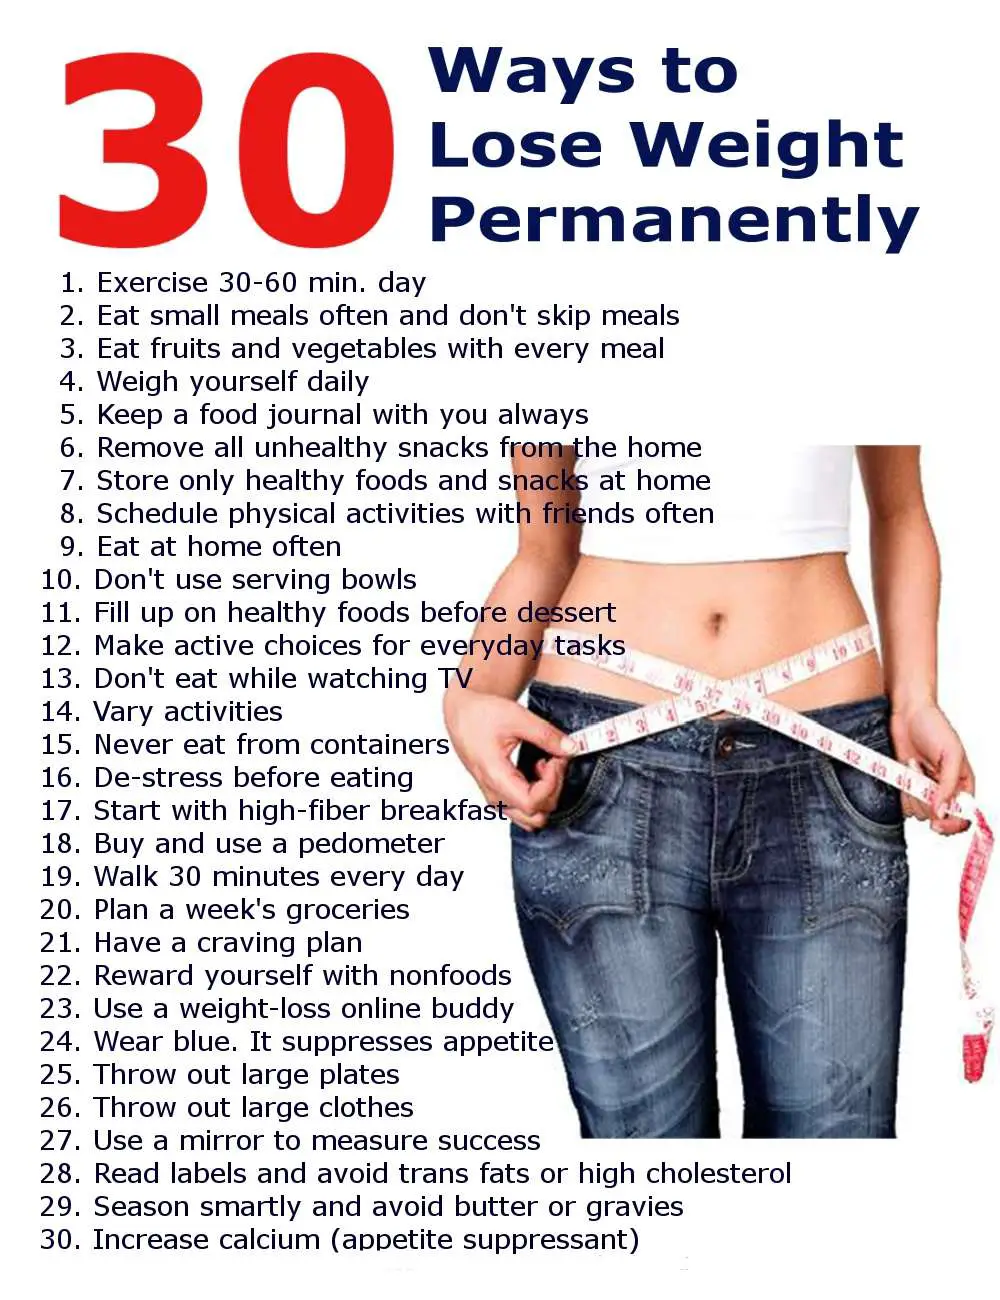 Quick ways to lose weight